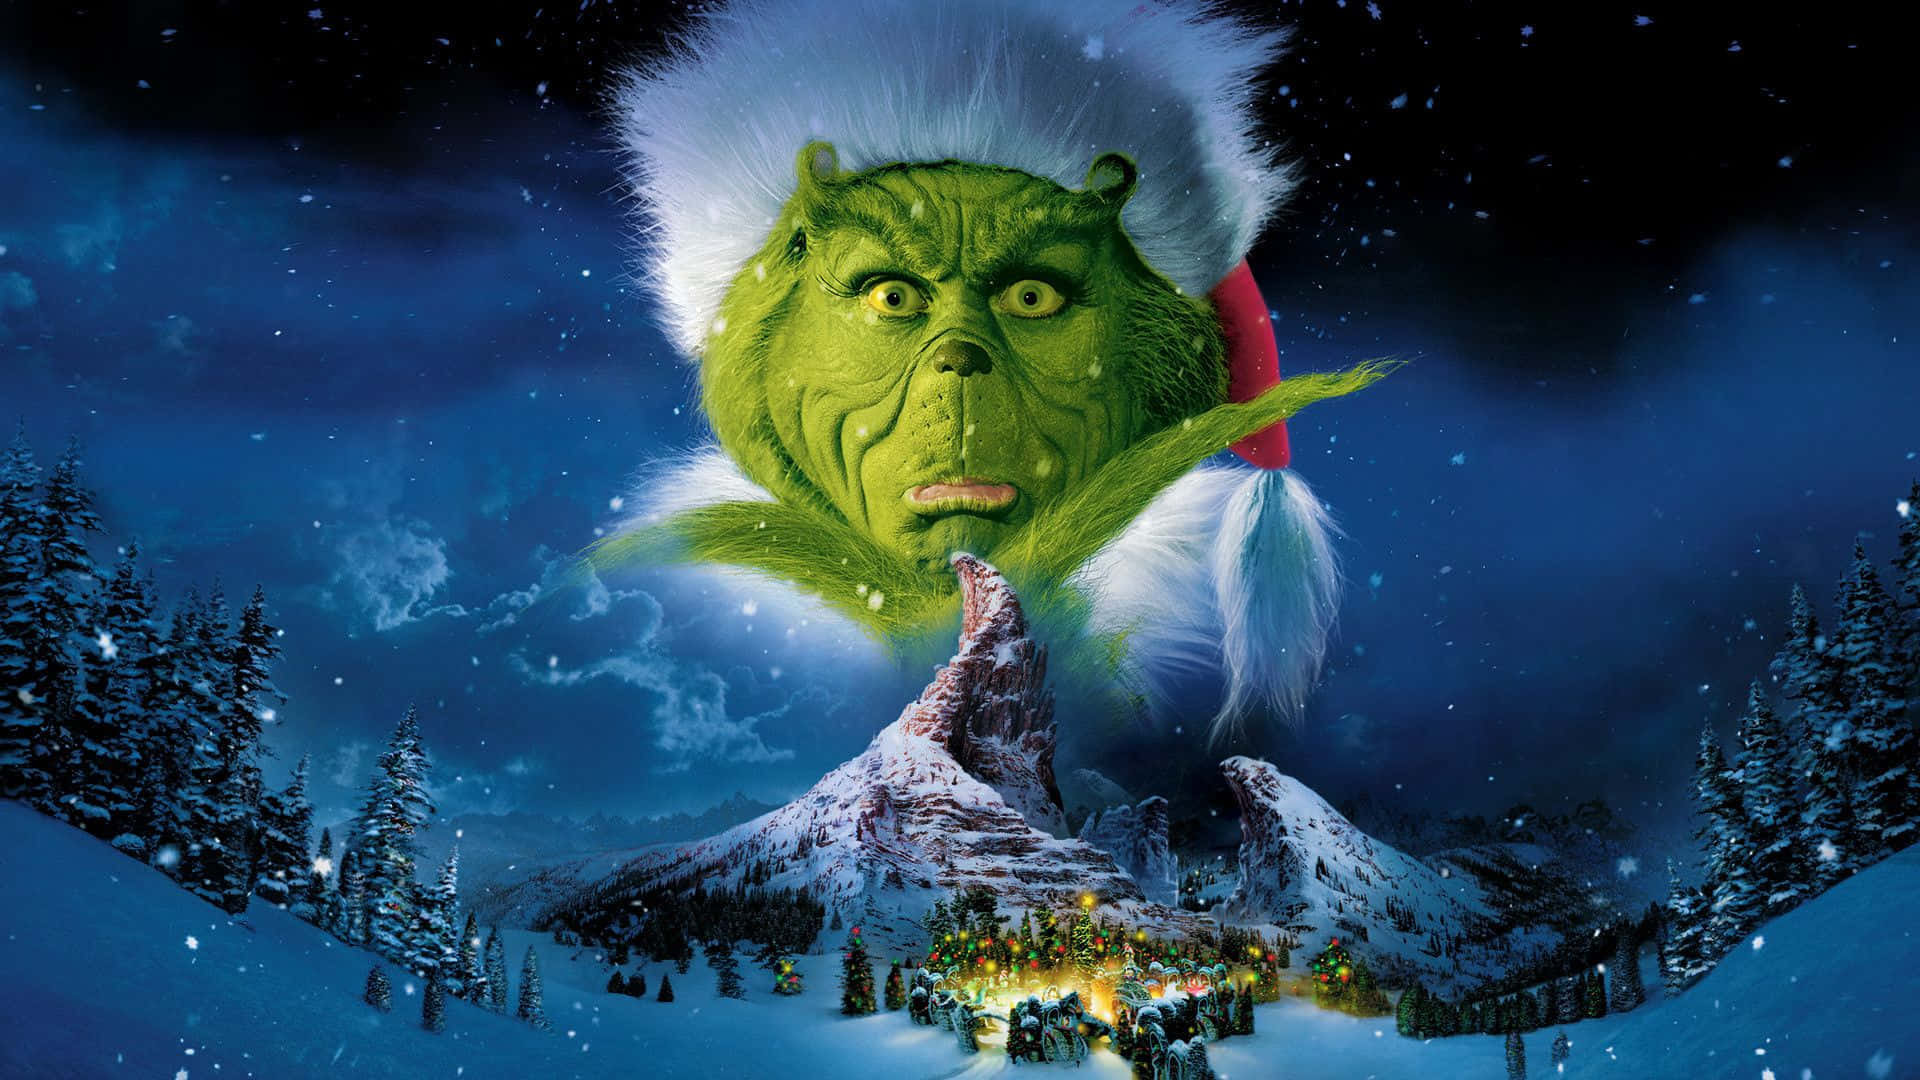 The Grinch In The Snow Background